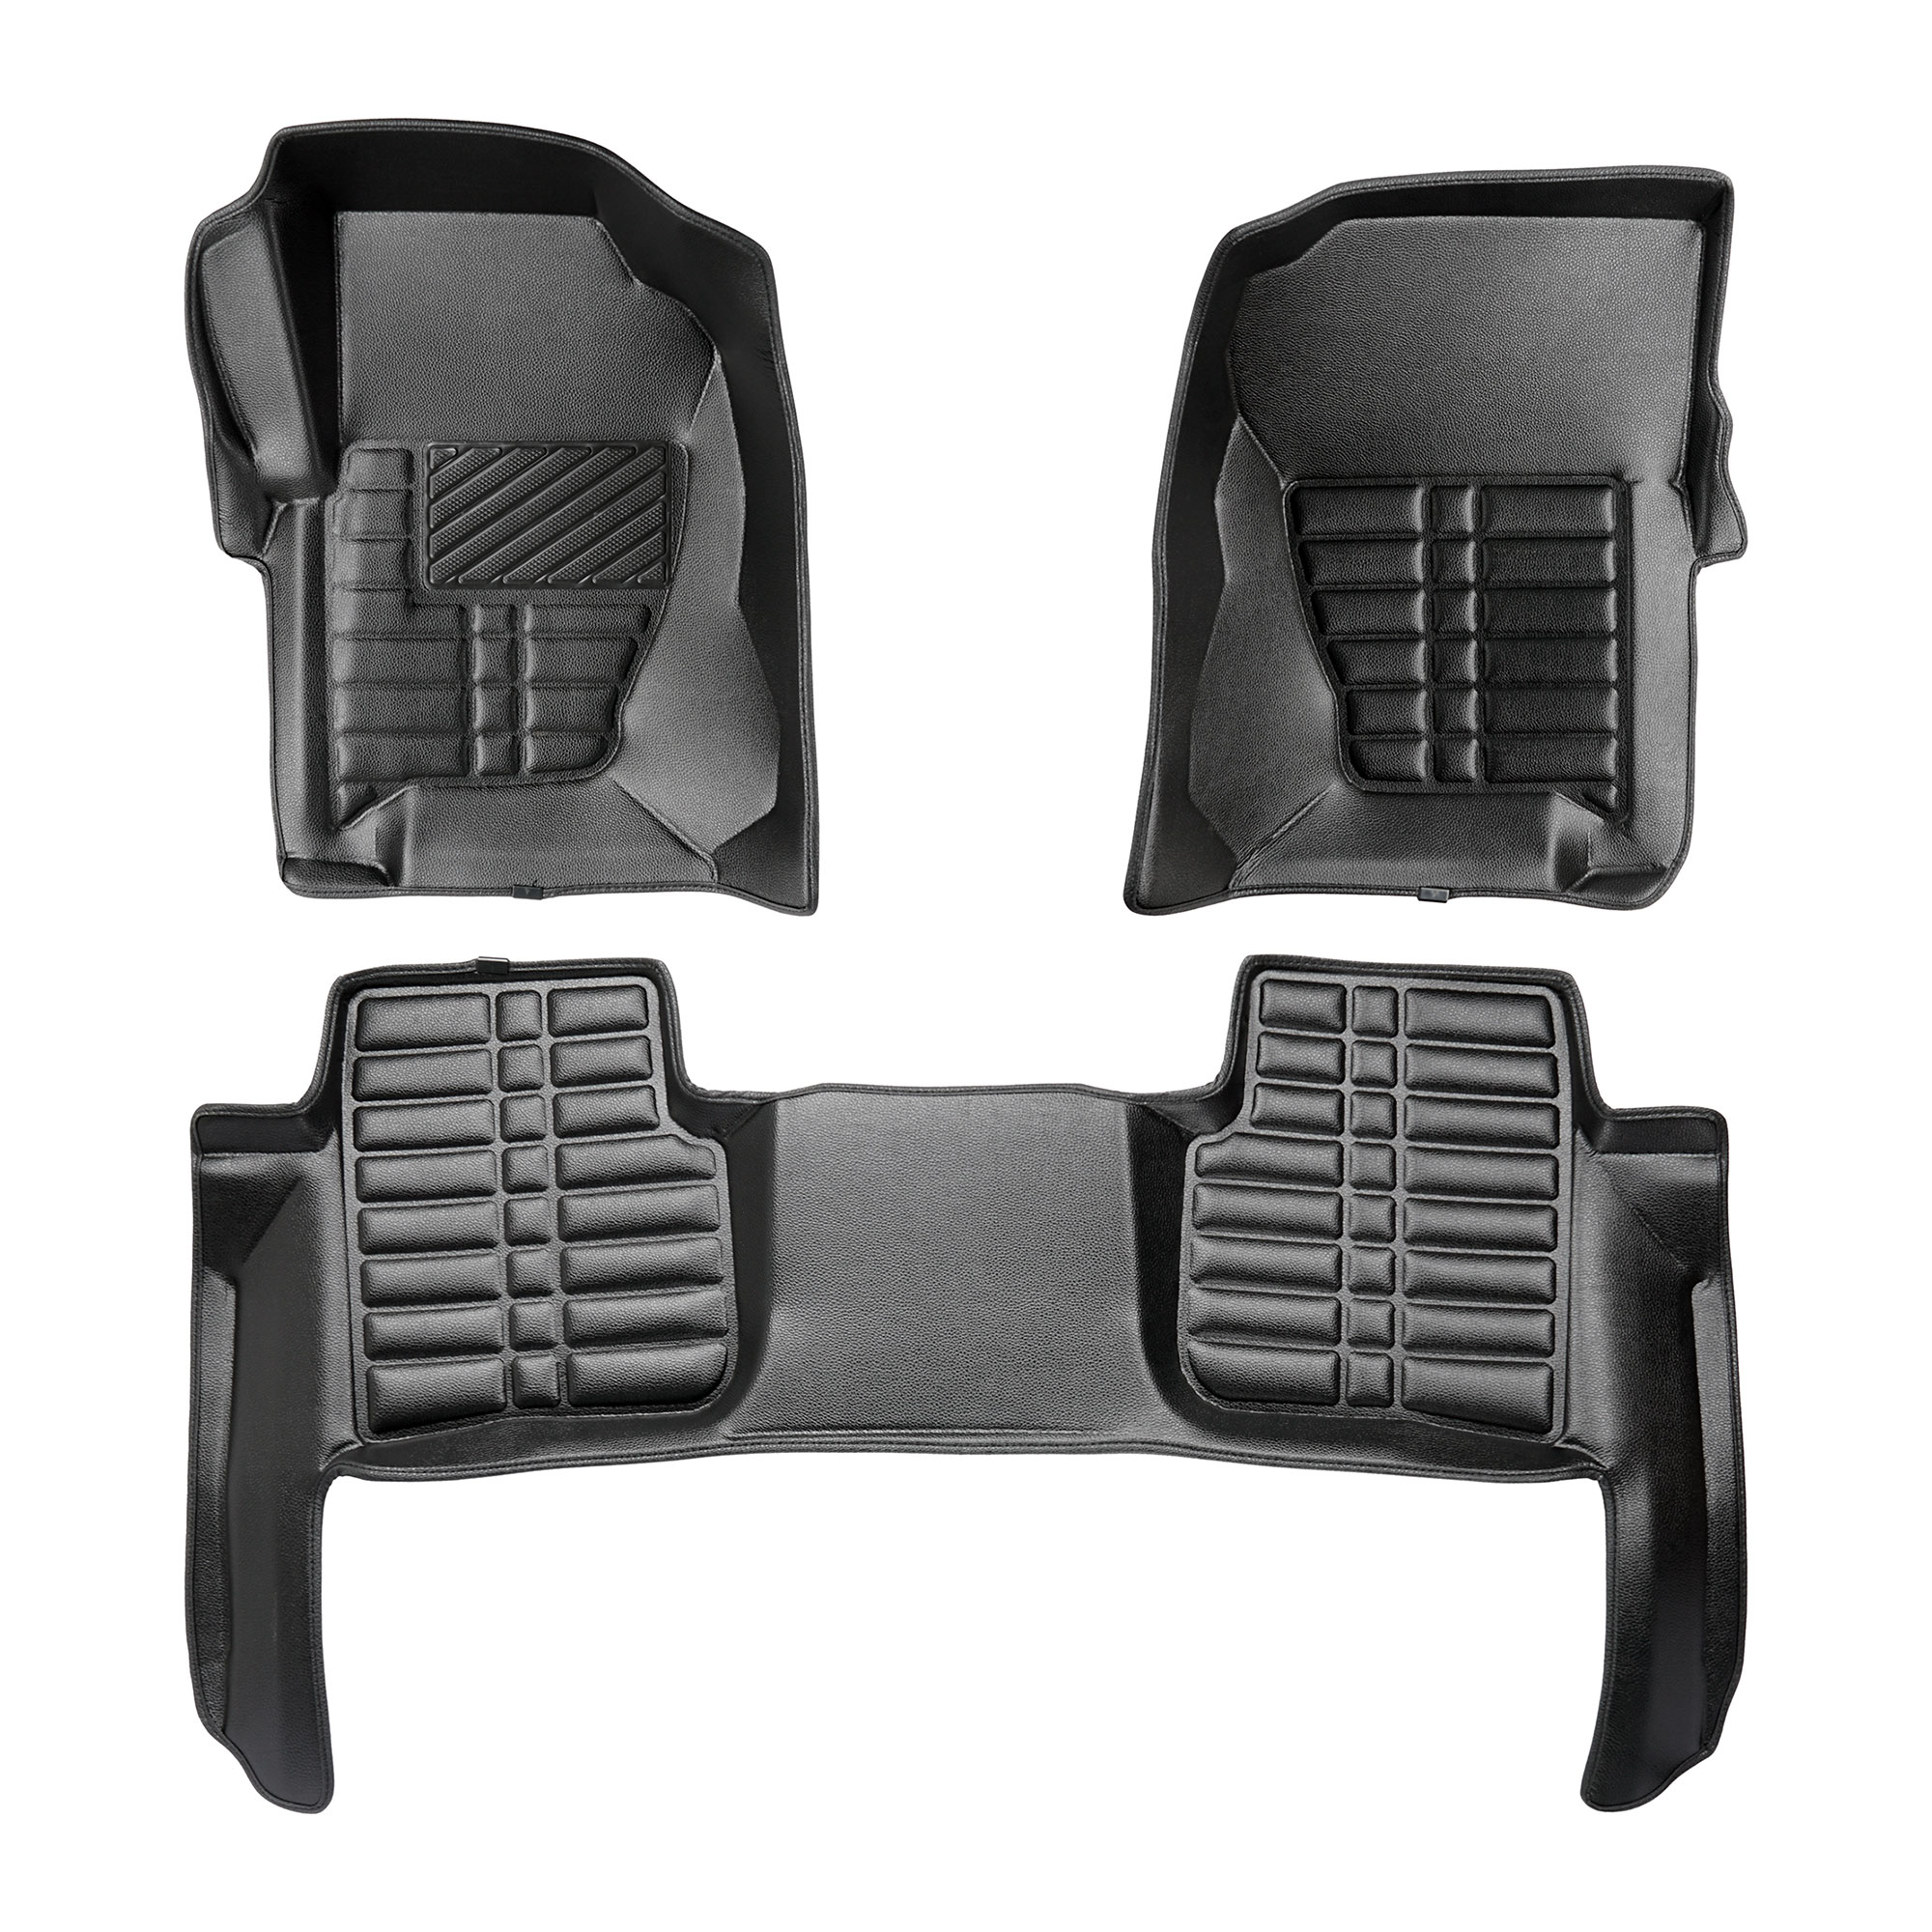 5D Premium Car Floor Mats fits 2009-2017 Land 4 Set TPE Construction Year of Discovery Rover